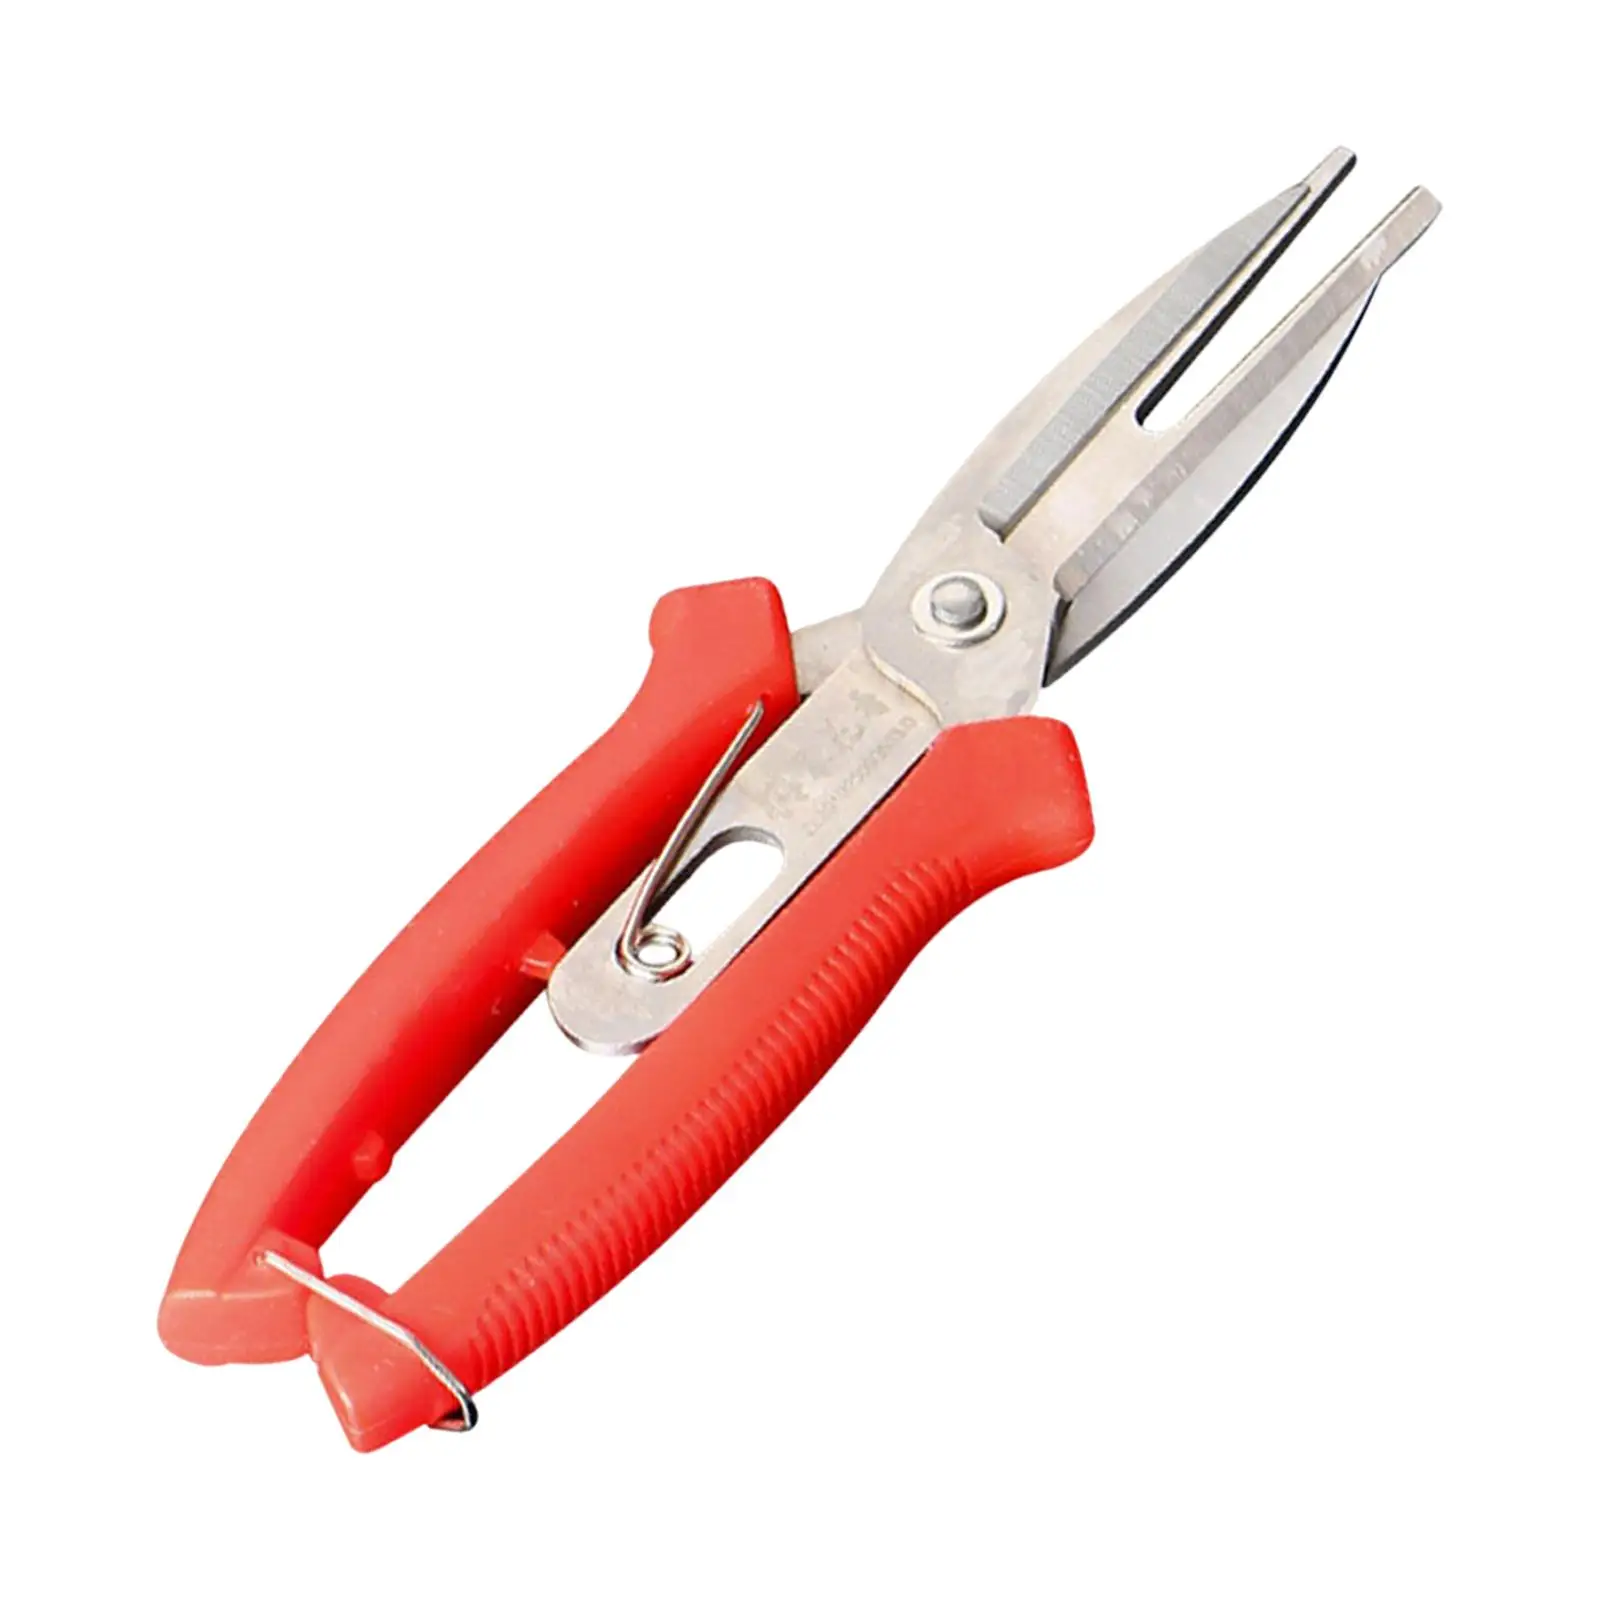 Garden Shears Professional Clippers Multi Use Secateurs for Gardening Stems